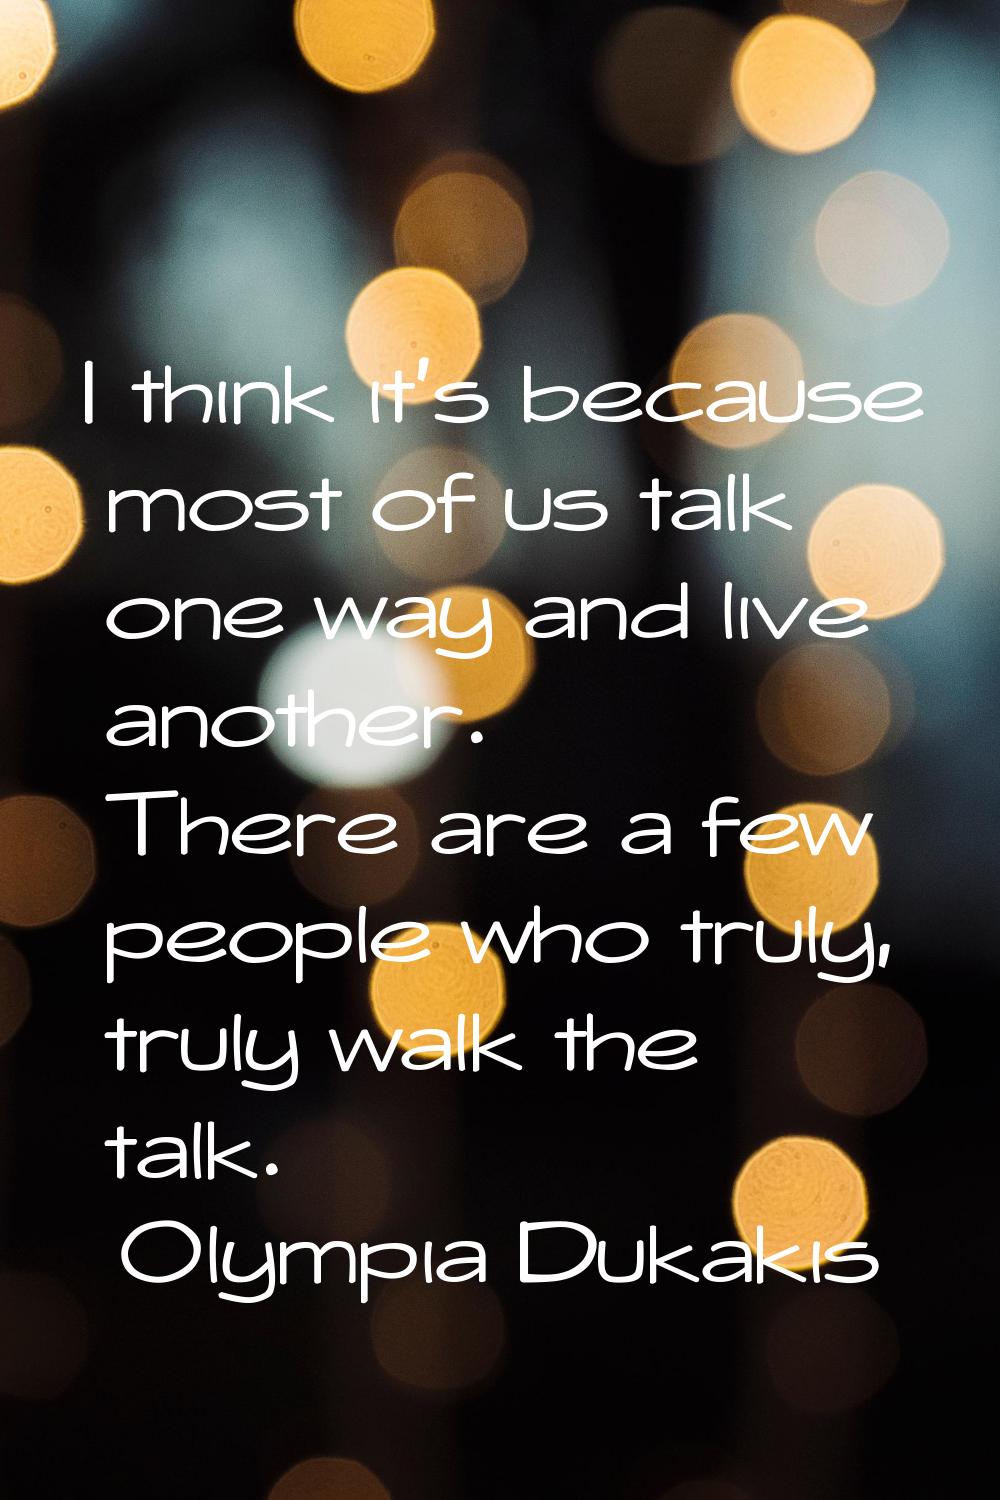 I think it's because most of us talk one way and live another. There are a few people who truly, tr